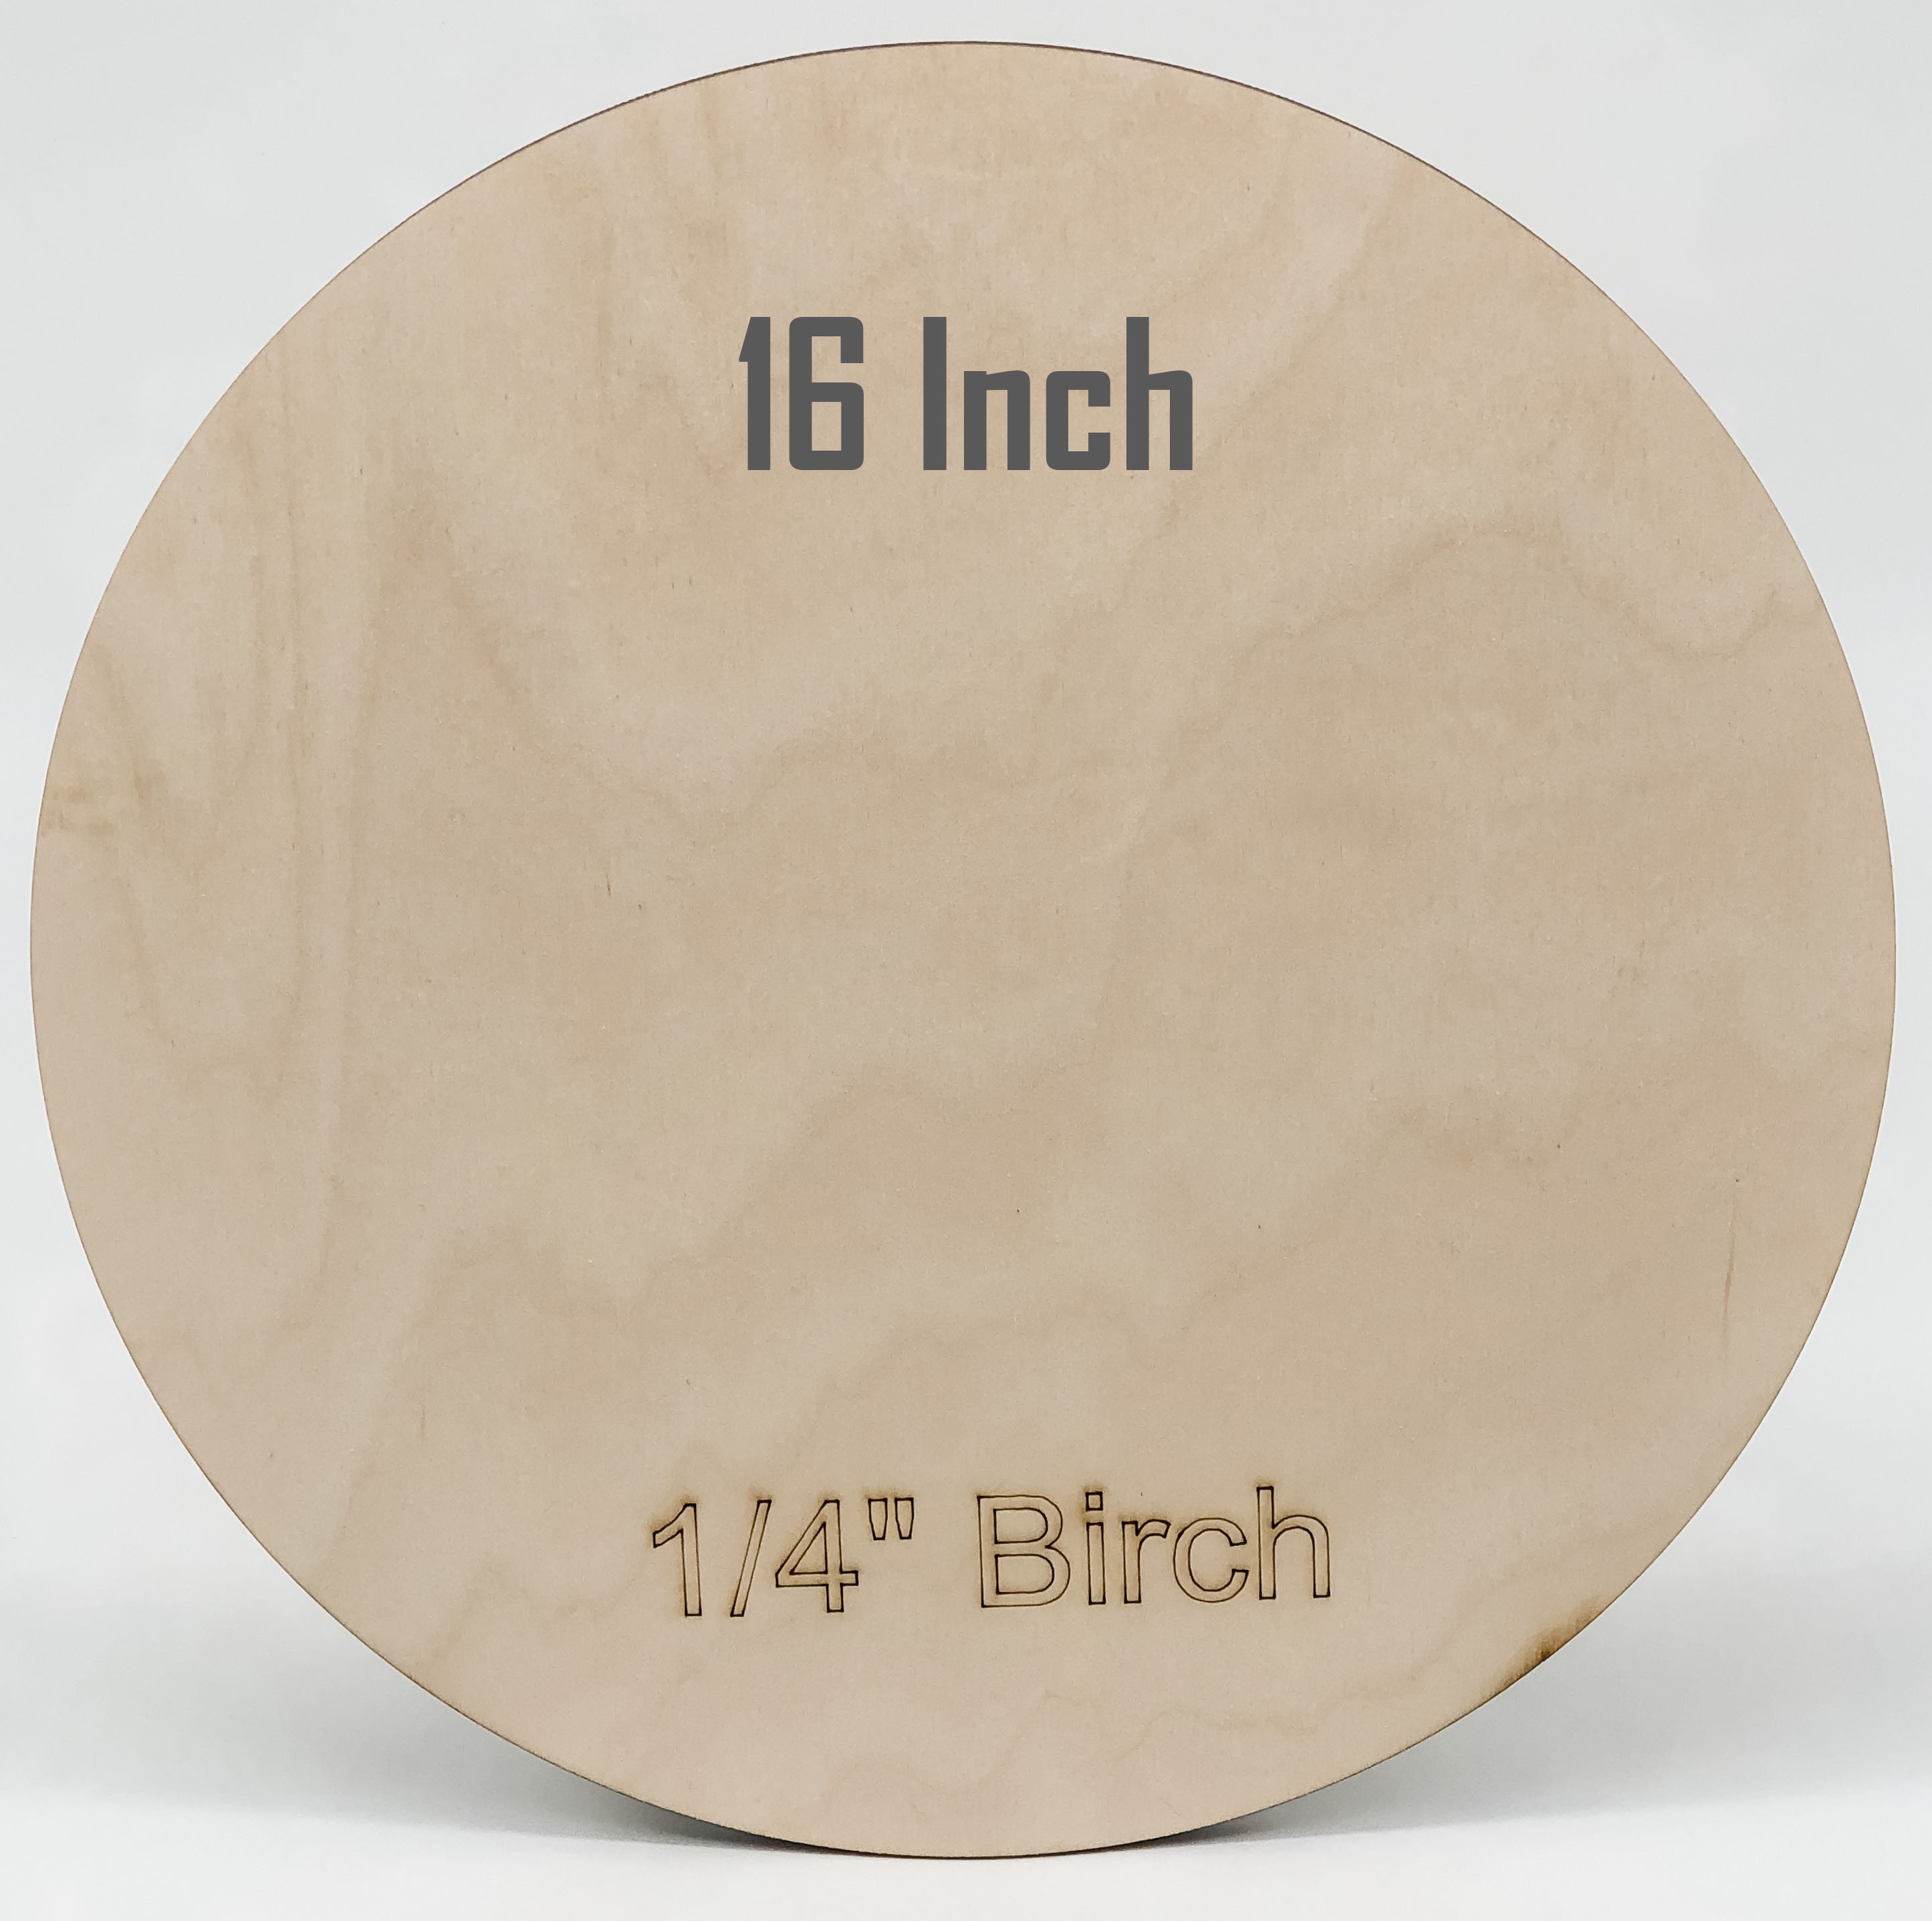 1.5 Inch Wood Circles, 1/4 Inch Thick Birch 1 1/2 Inch Diameter Birch Wood  Rounds, Craft Supplies, DIY Wooden Circles for Crafting 